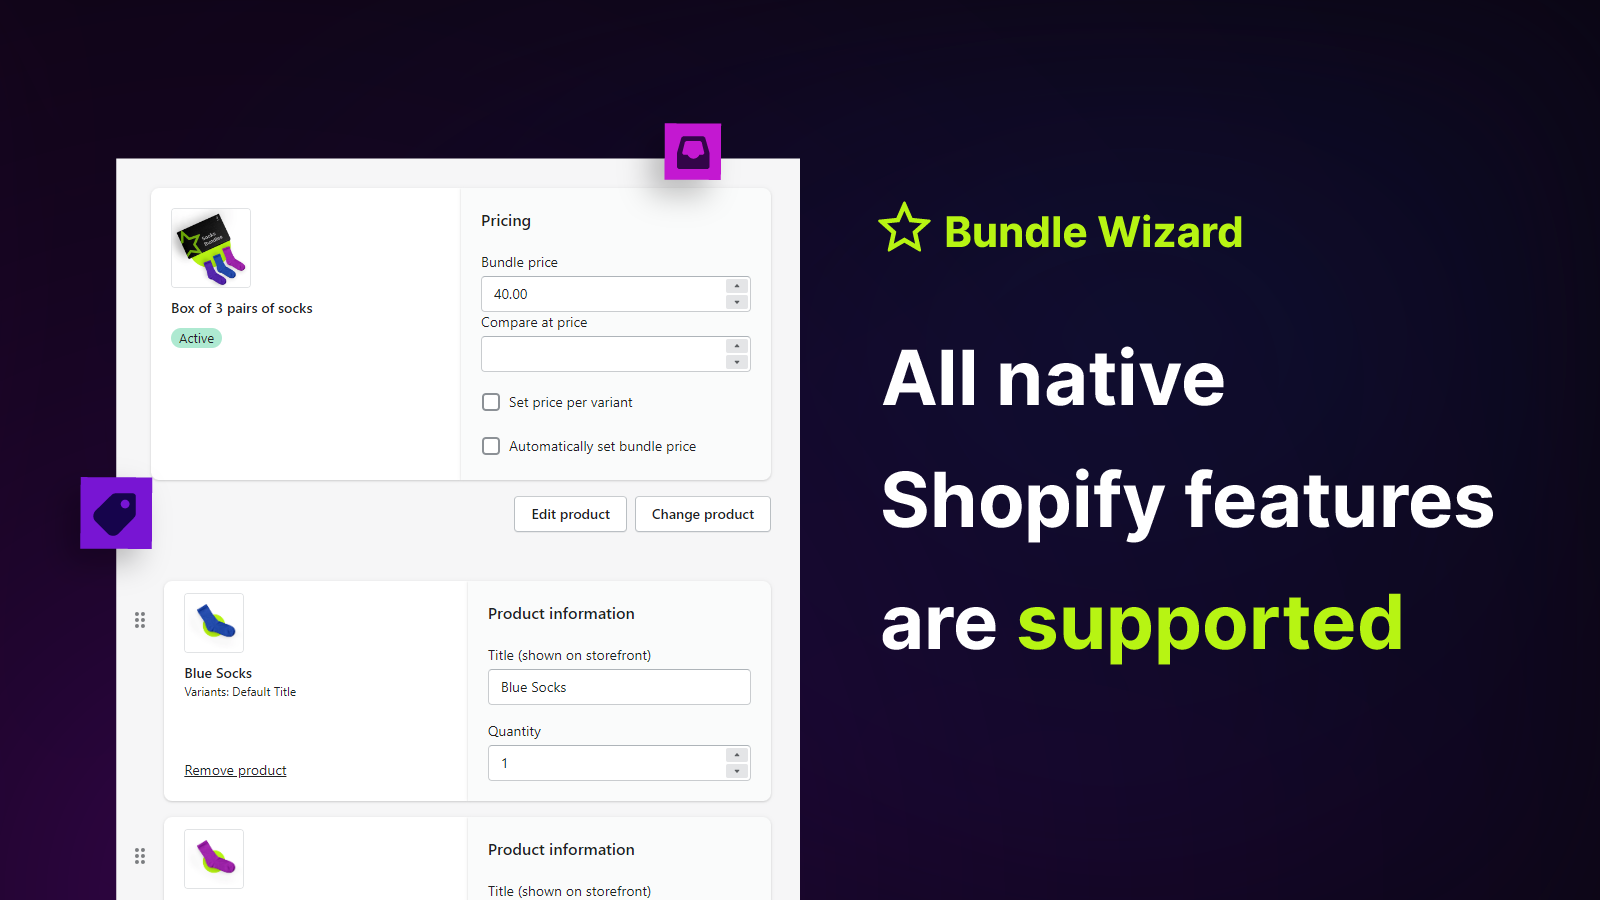 Support for all native Shopify features